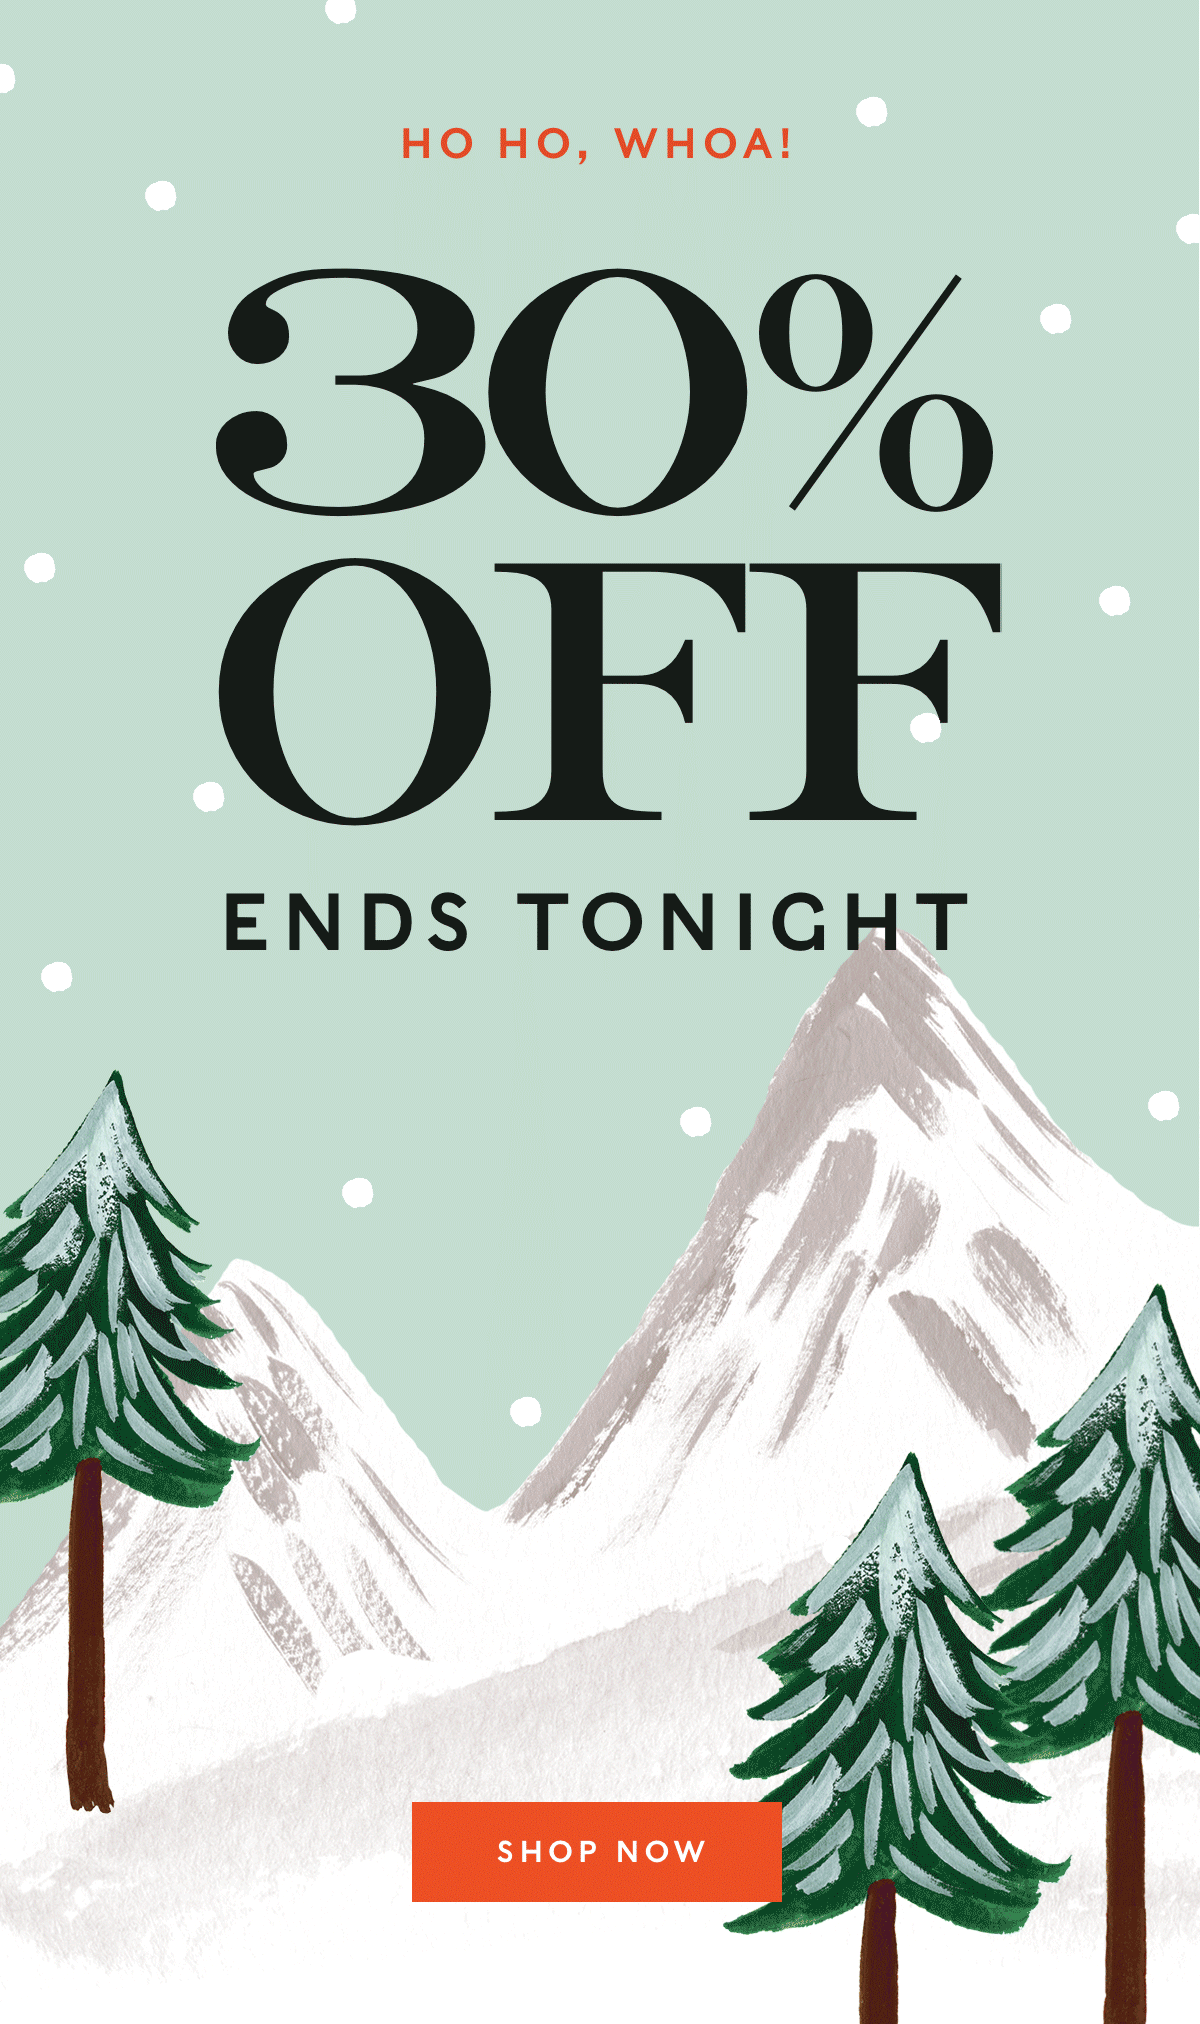 30% Off Everything ends tonight. Use Code MERRY30